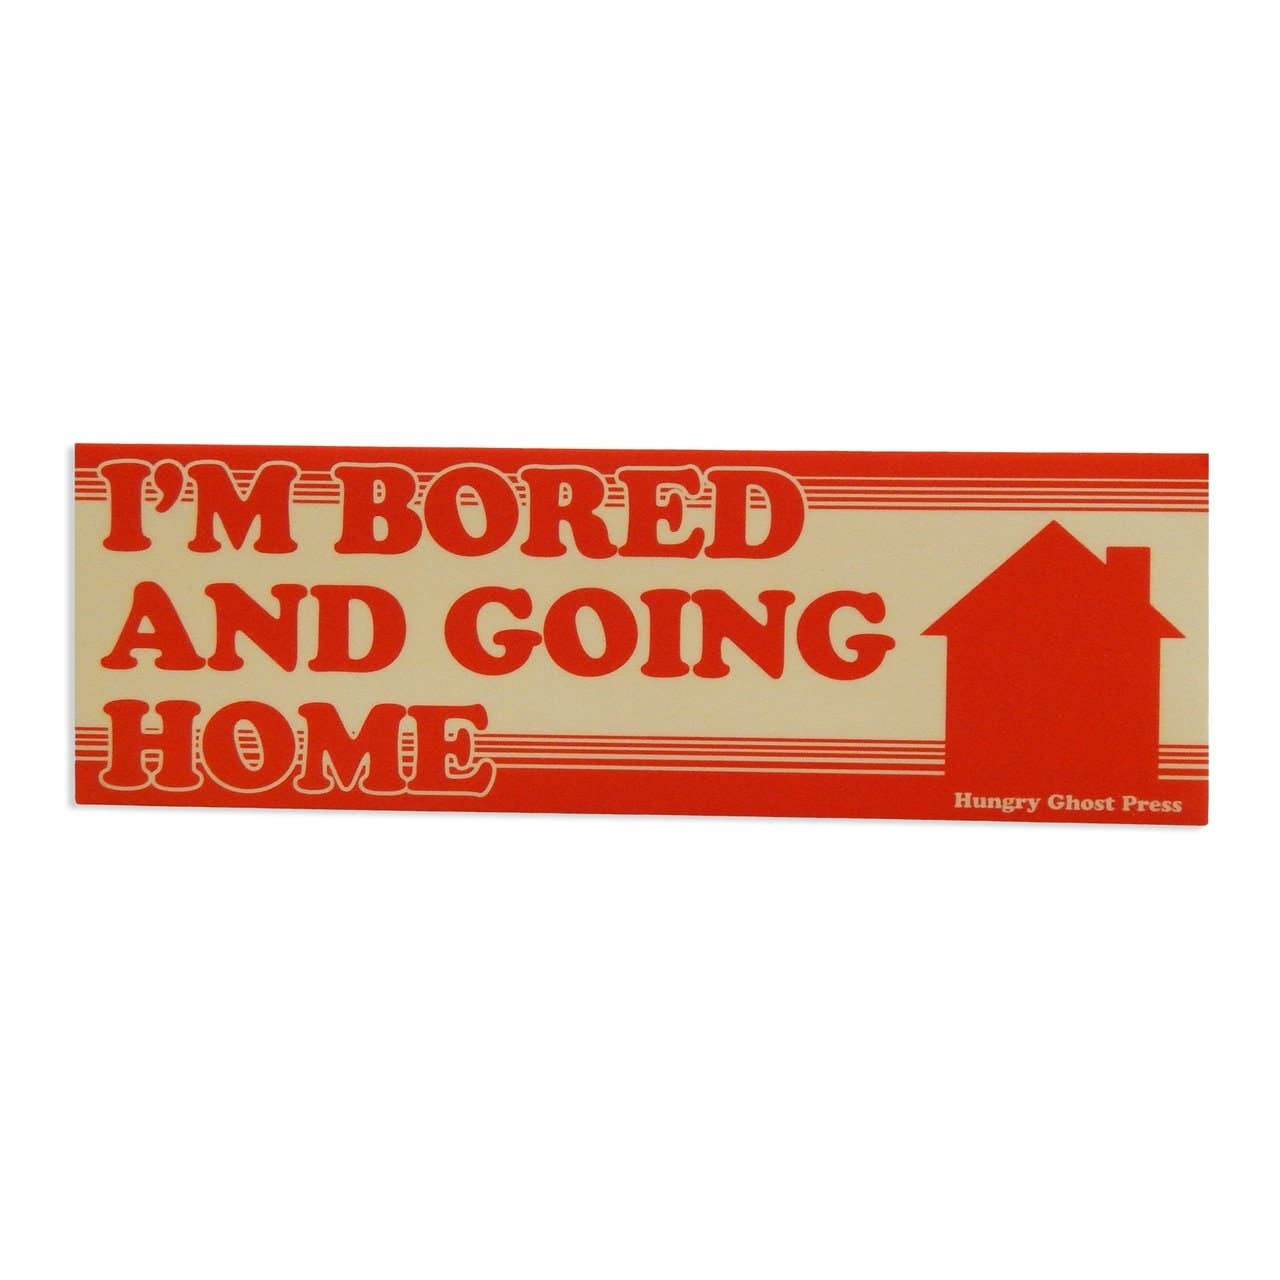 Bored and Going Home Bumper Sticker